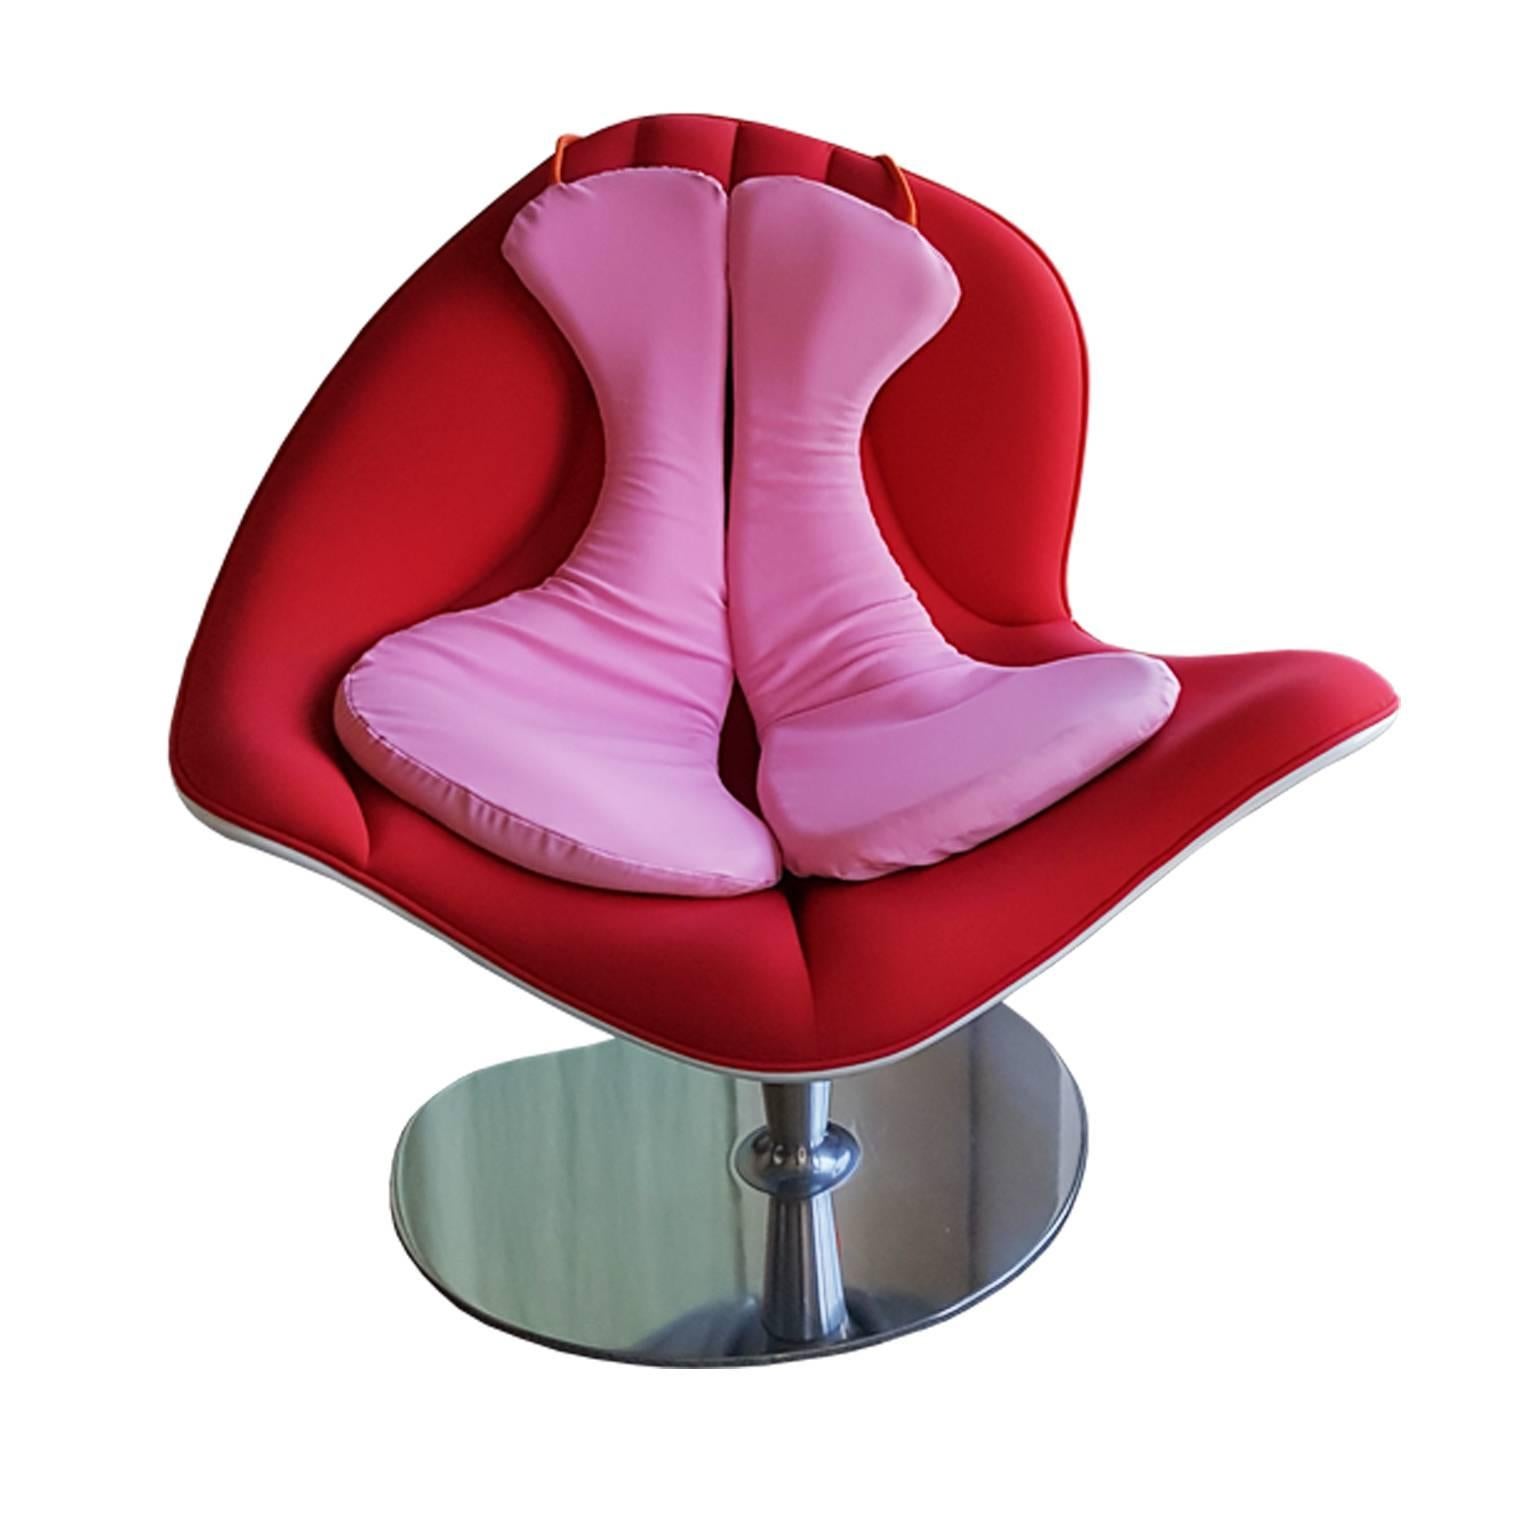 Italo Rota Red Fabric Italian Swivel Armchair with White Back and Steel Base 2